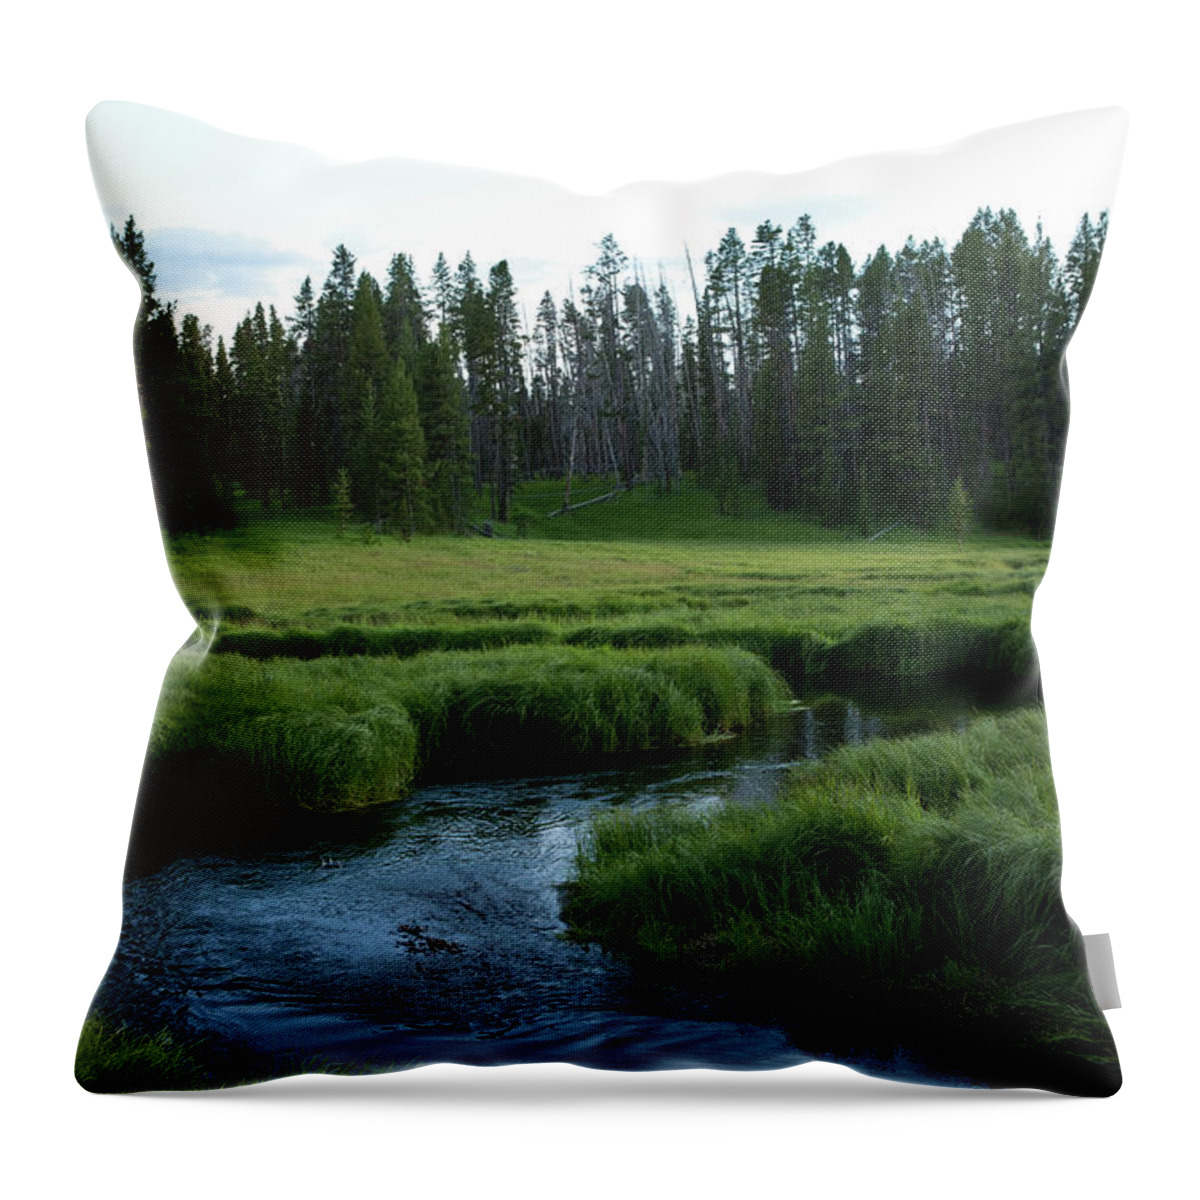 Scenics Throw Pillow featuring the photograph Yellowstone River In Summer by Miguelmalo